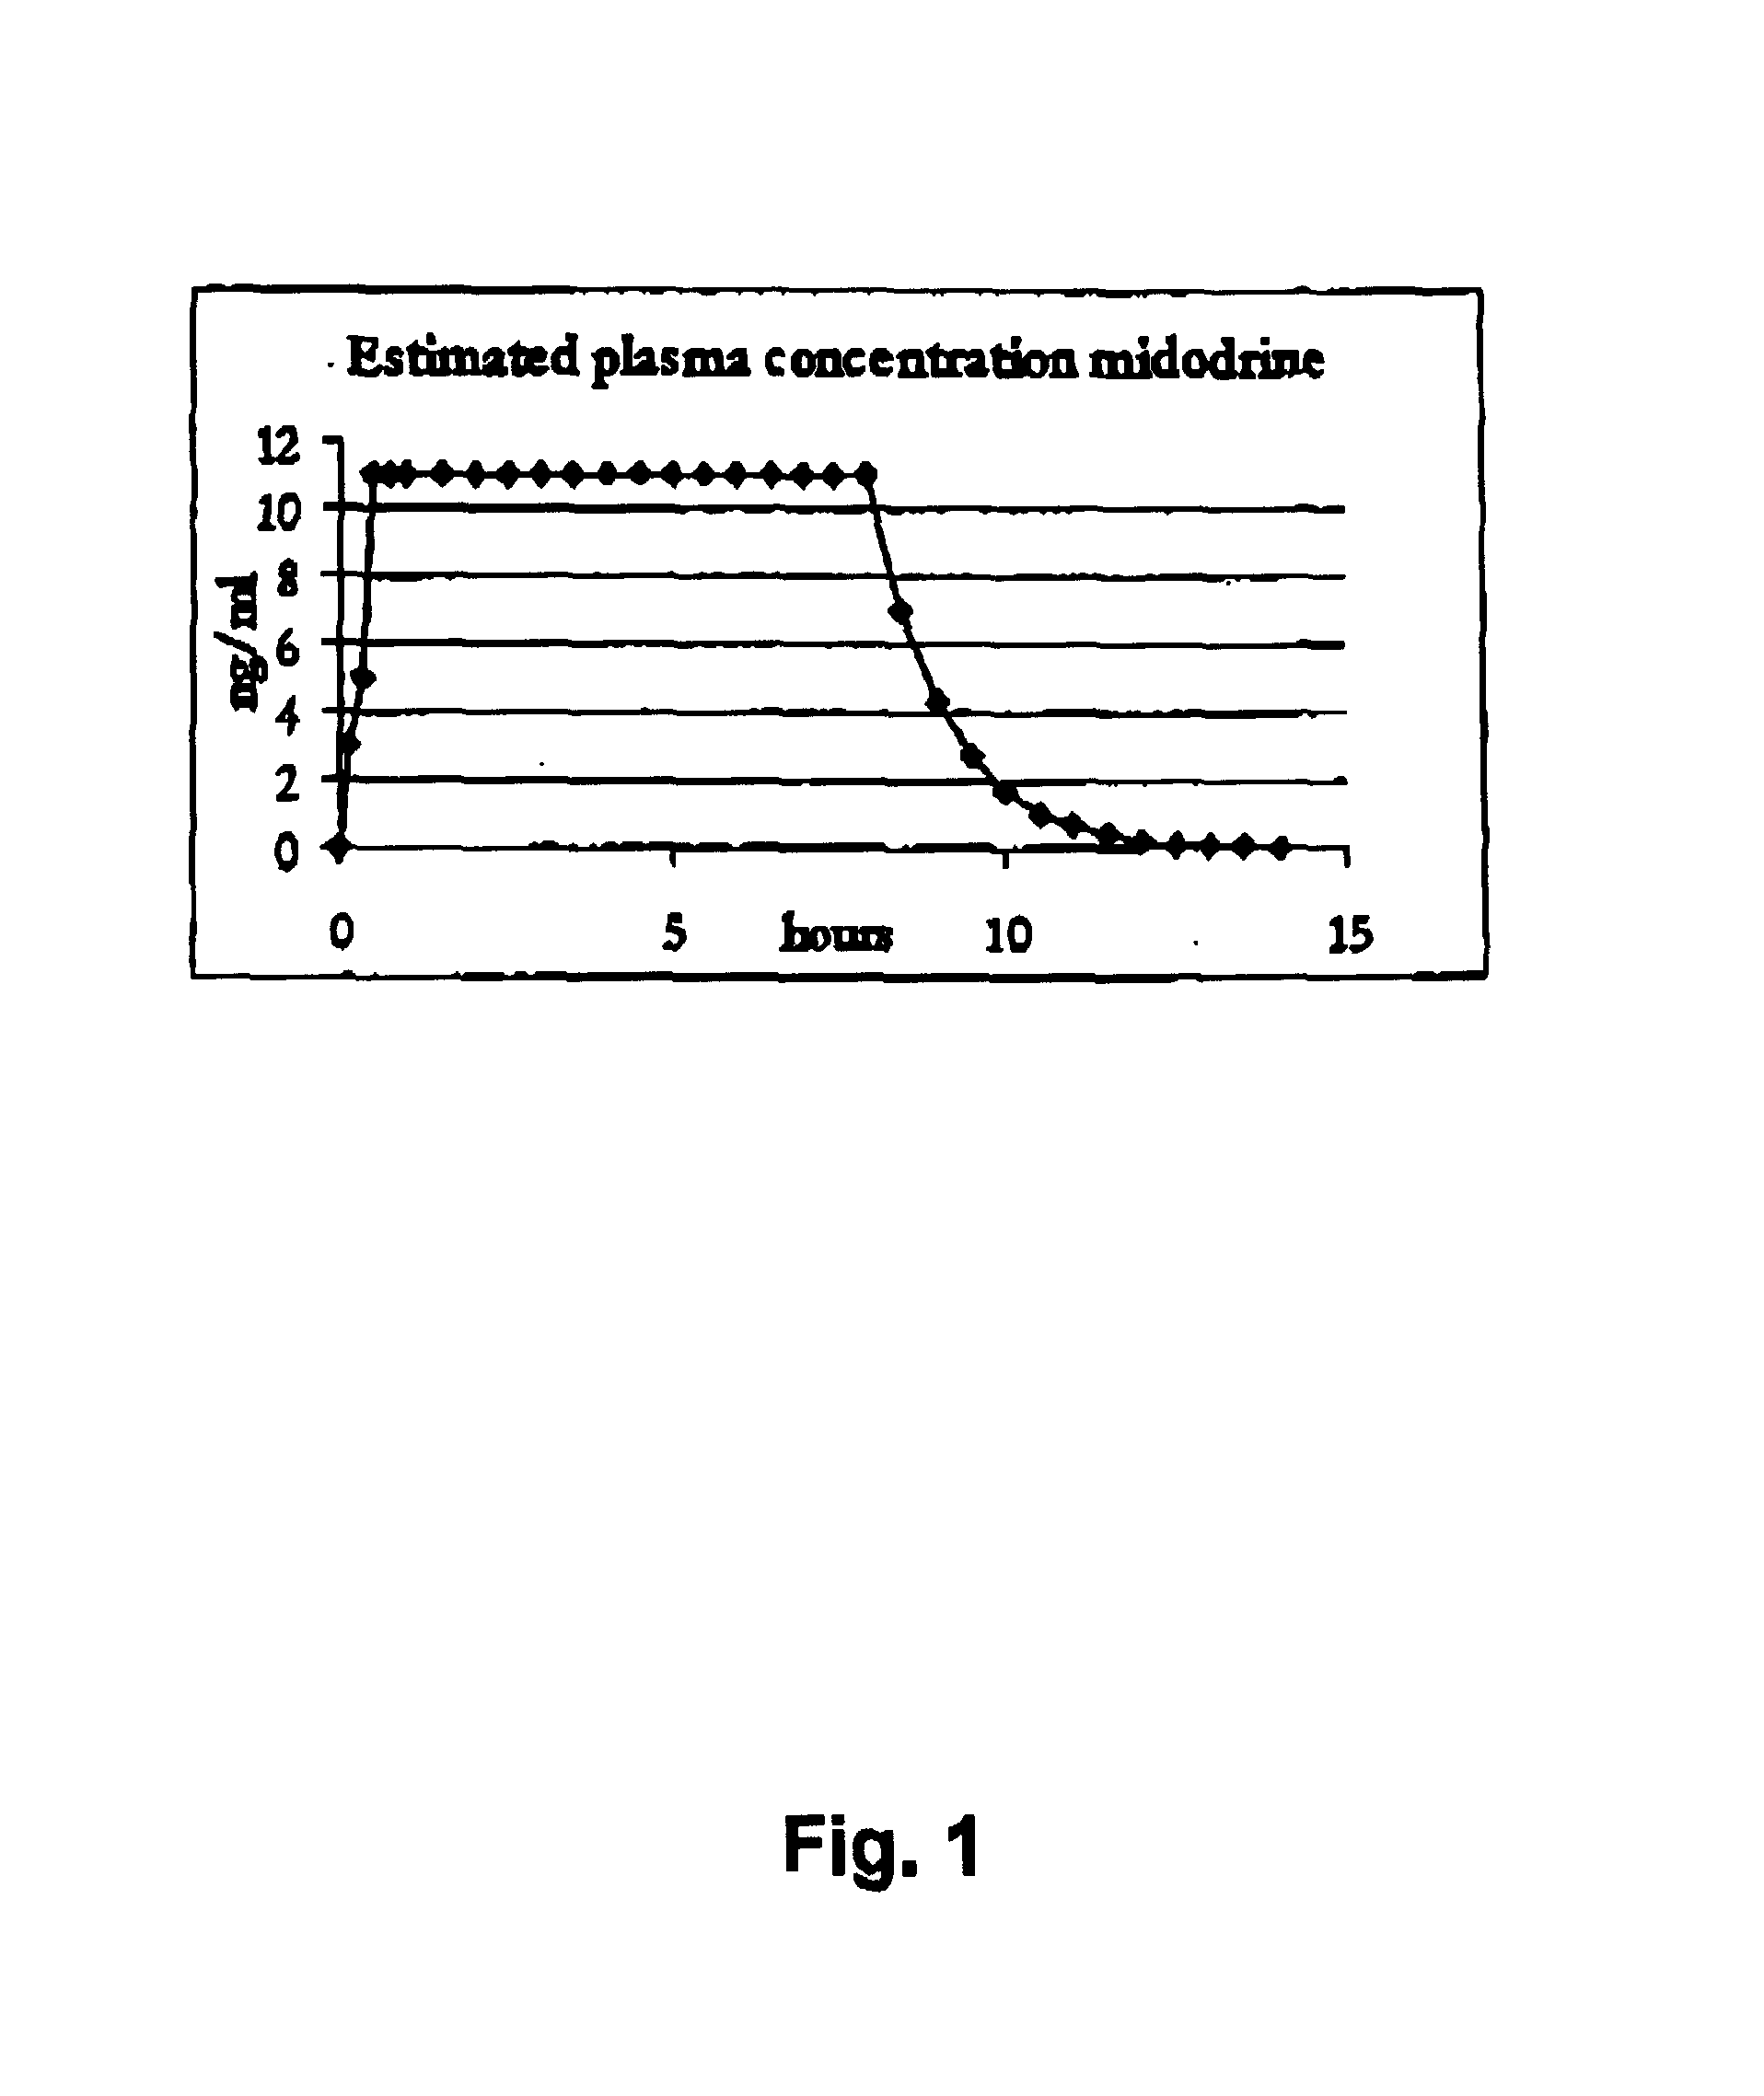 Controlled release pharmaceutical composition for oral use containing midodrine and/or active metabolite, desglymidodrine